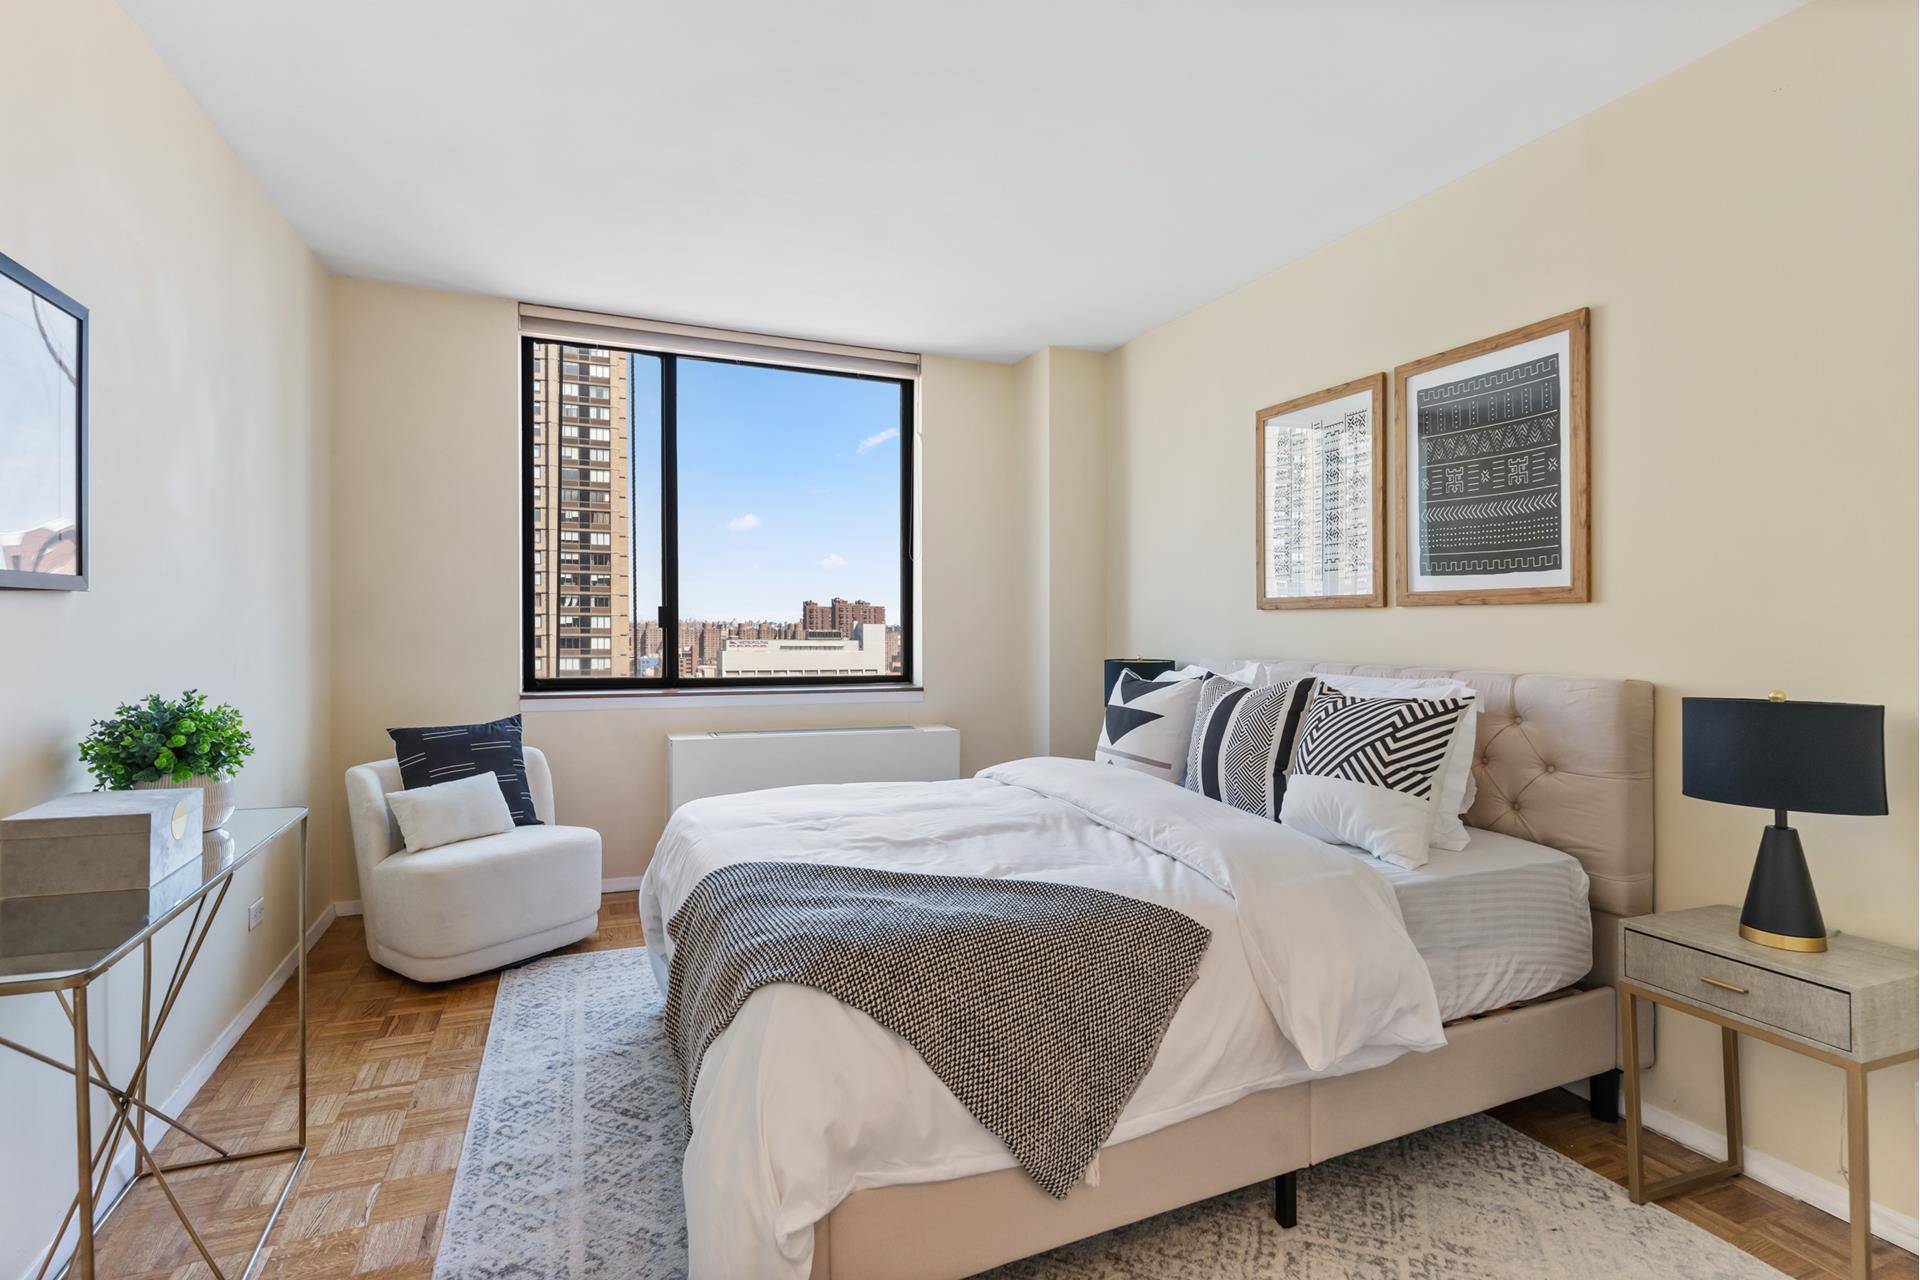 Perched high in the sky, Apt 22G is a 3 bedroom, 3 bath corner apartment that feels like a home with floor to ceiling windows spanning 1648 square feet.